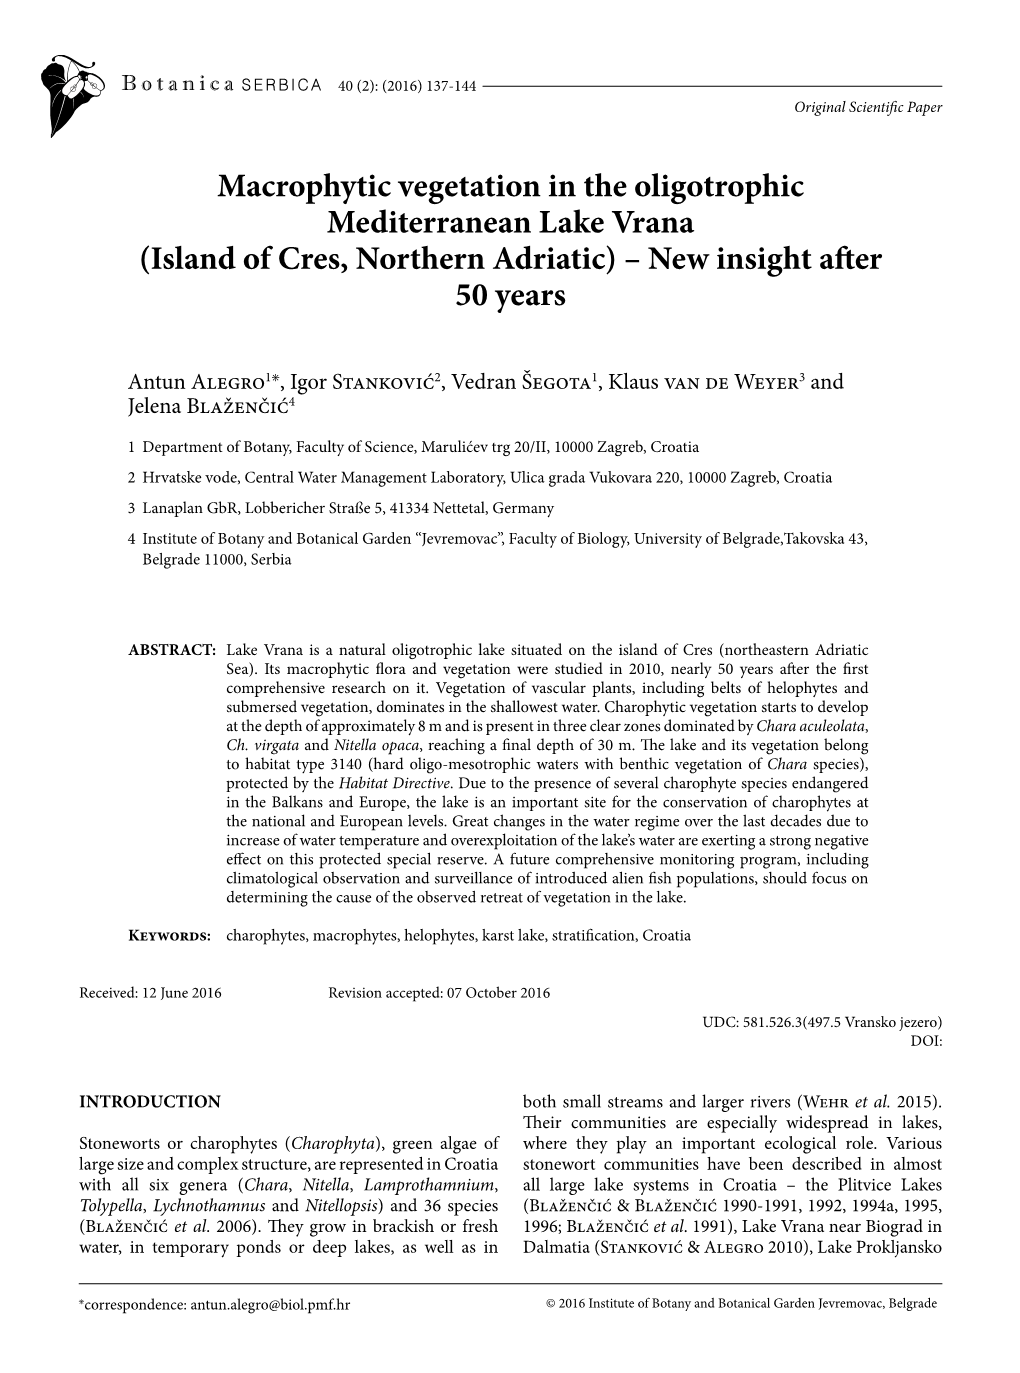 Macrophytic Vegetation in the Oligotrophic Mediterranean Lake Vrana (Island of Cres, Northern Adriatic) – New Insight After 50 Years